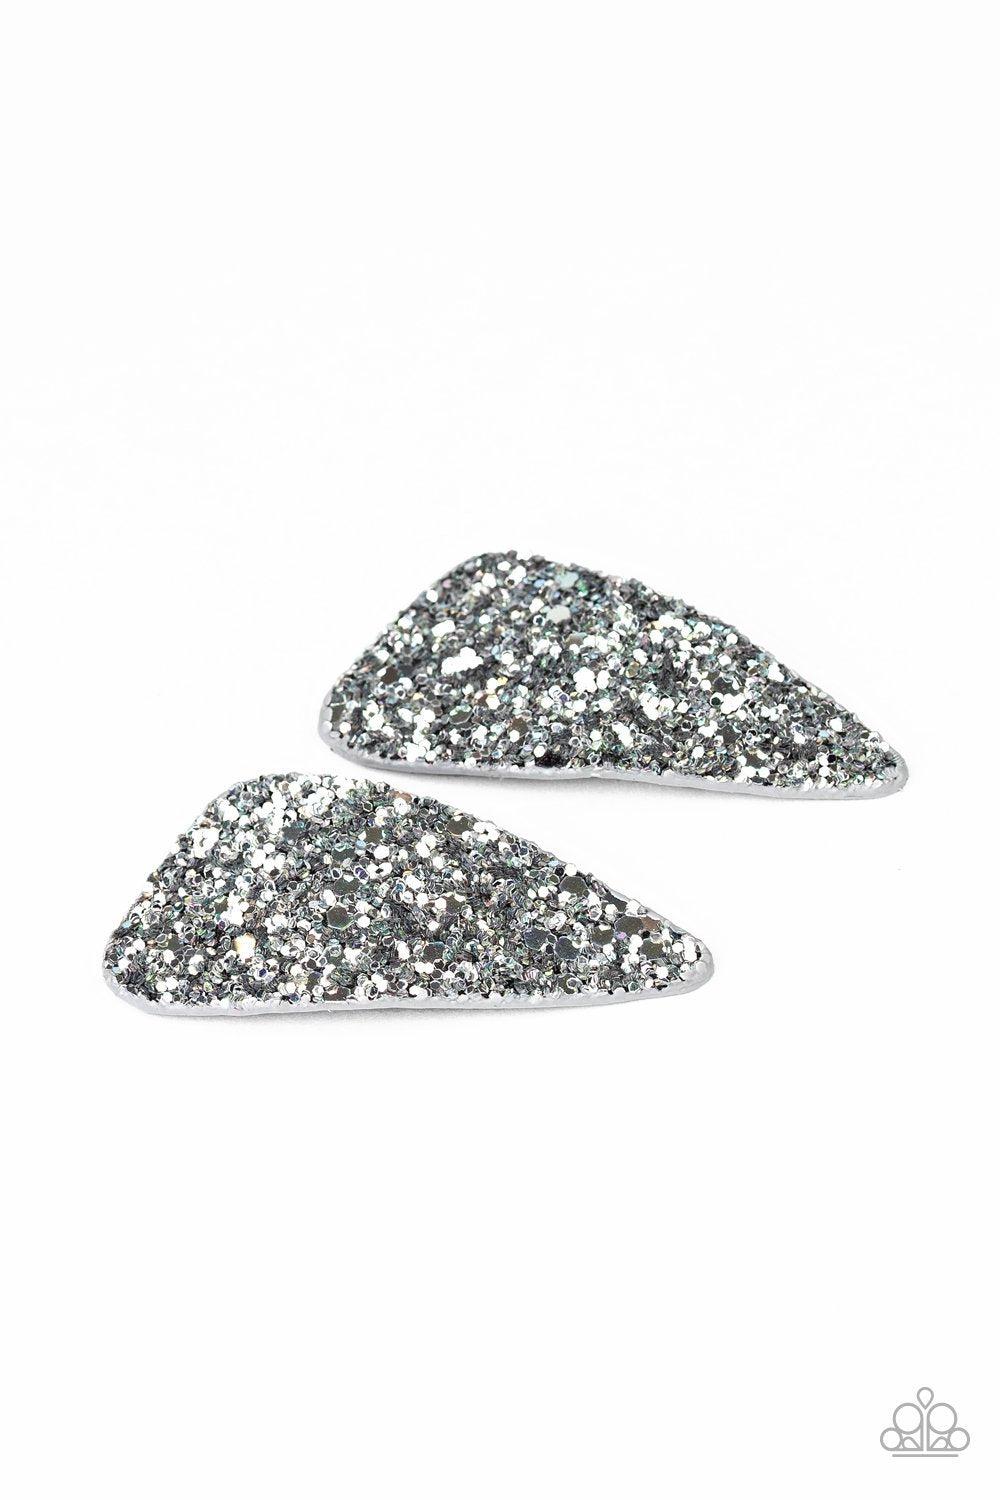 Squad Shimmer Silver Sequin Hair Clips - Paparazzi Accessories-CarasShop.com - $5 Jewelry by Cara Jewels